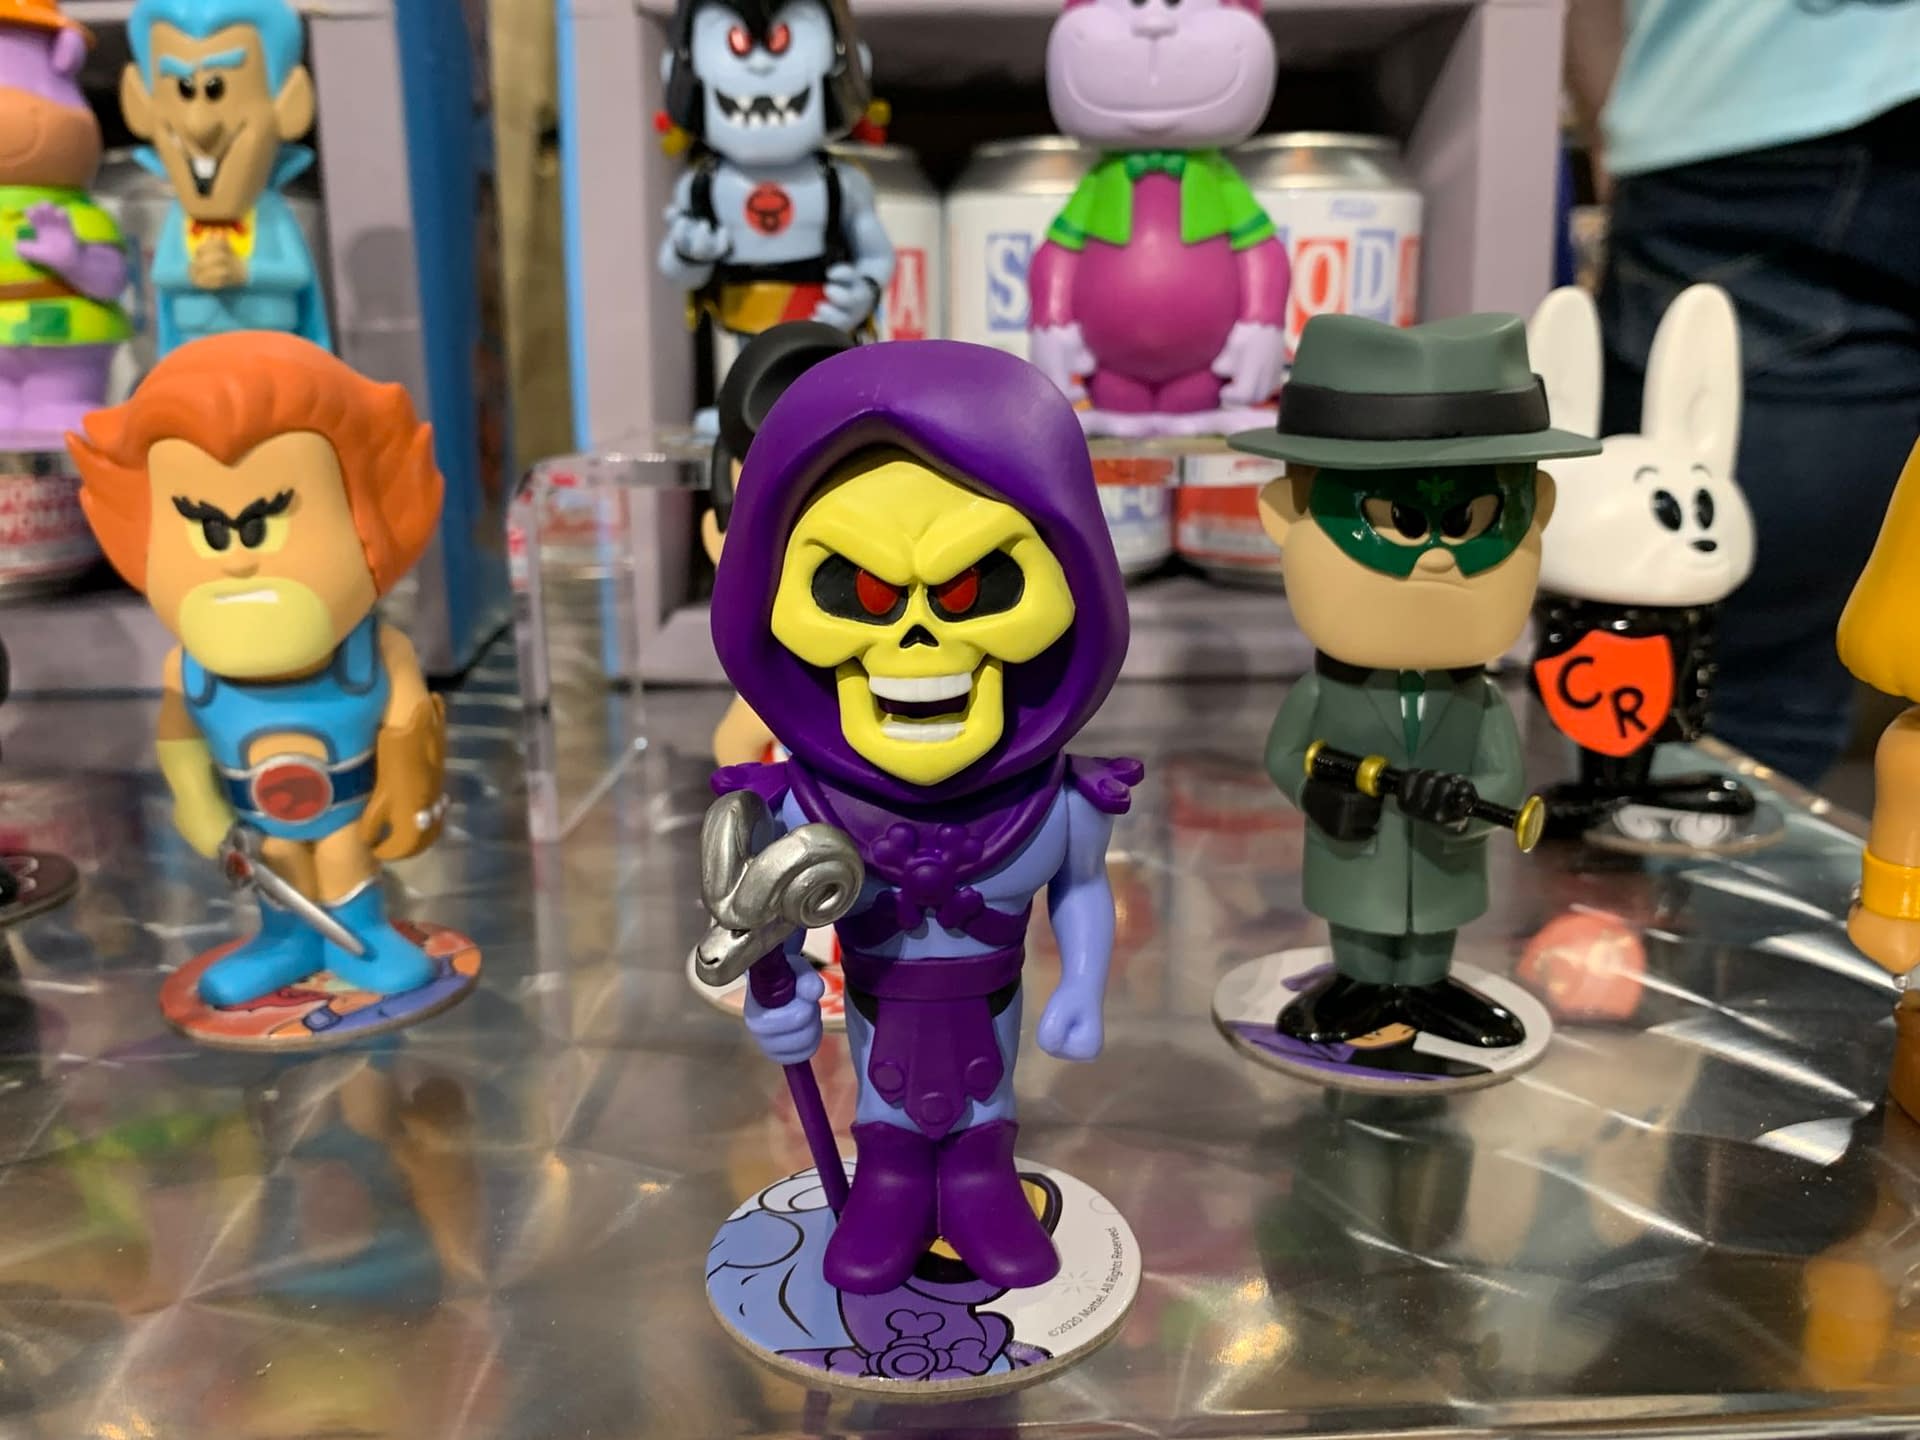 Funko New York Toy Fair: 85 Photos from the Booth